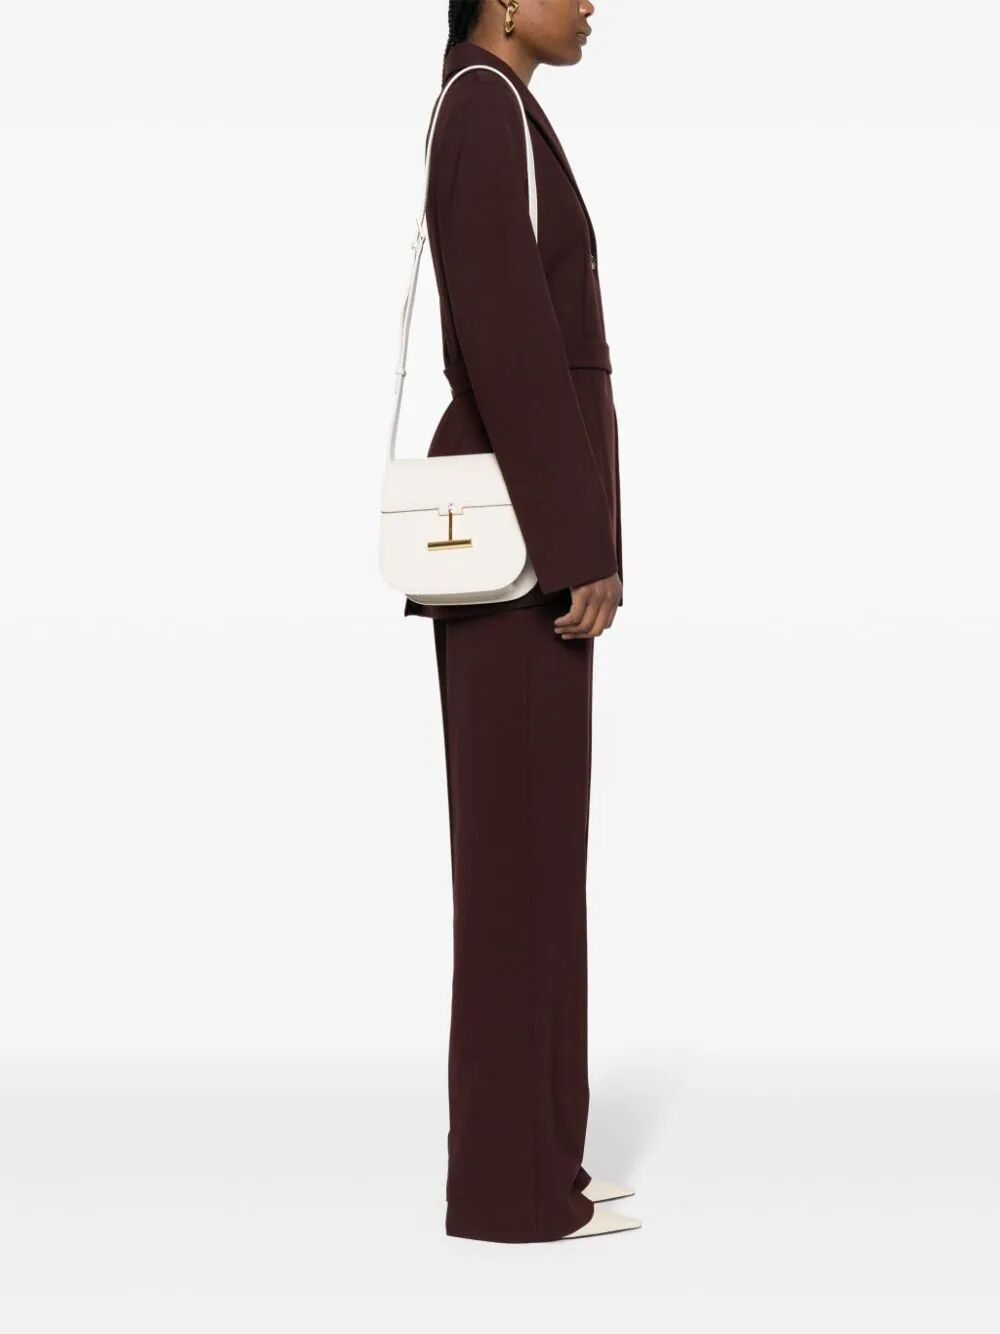 Shop Tom Ford Shoulder And Crossbody Day Bag In White